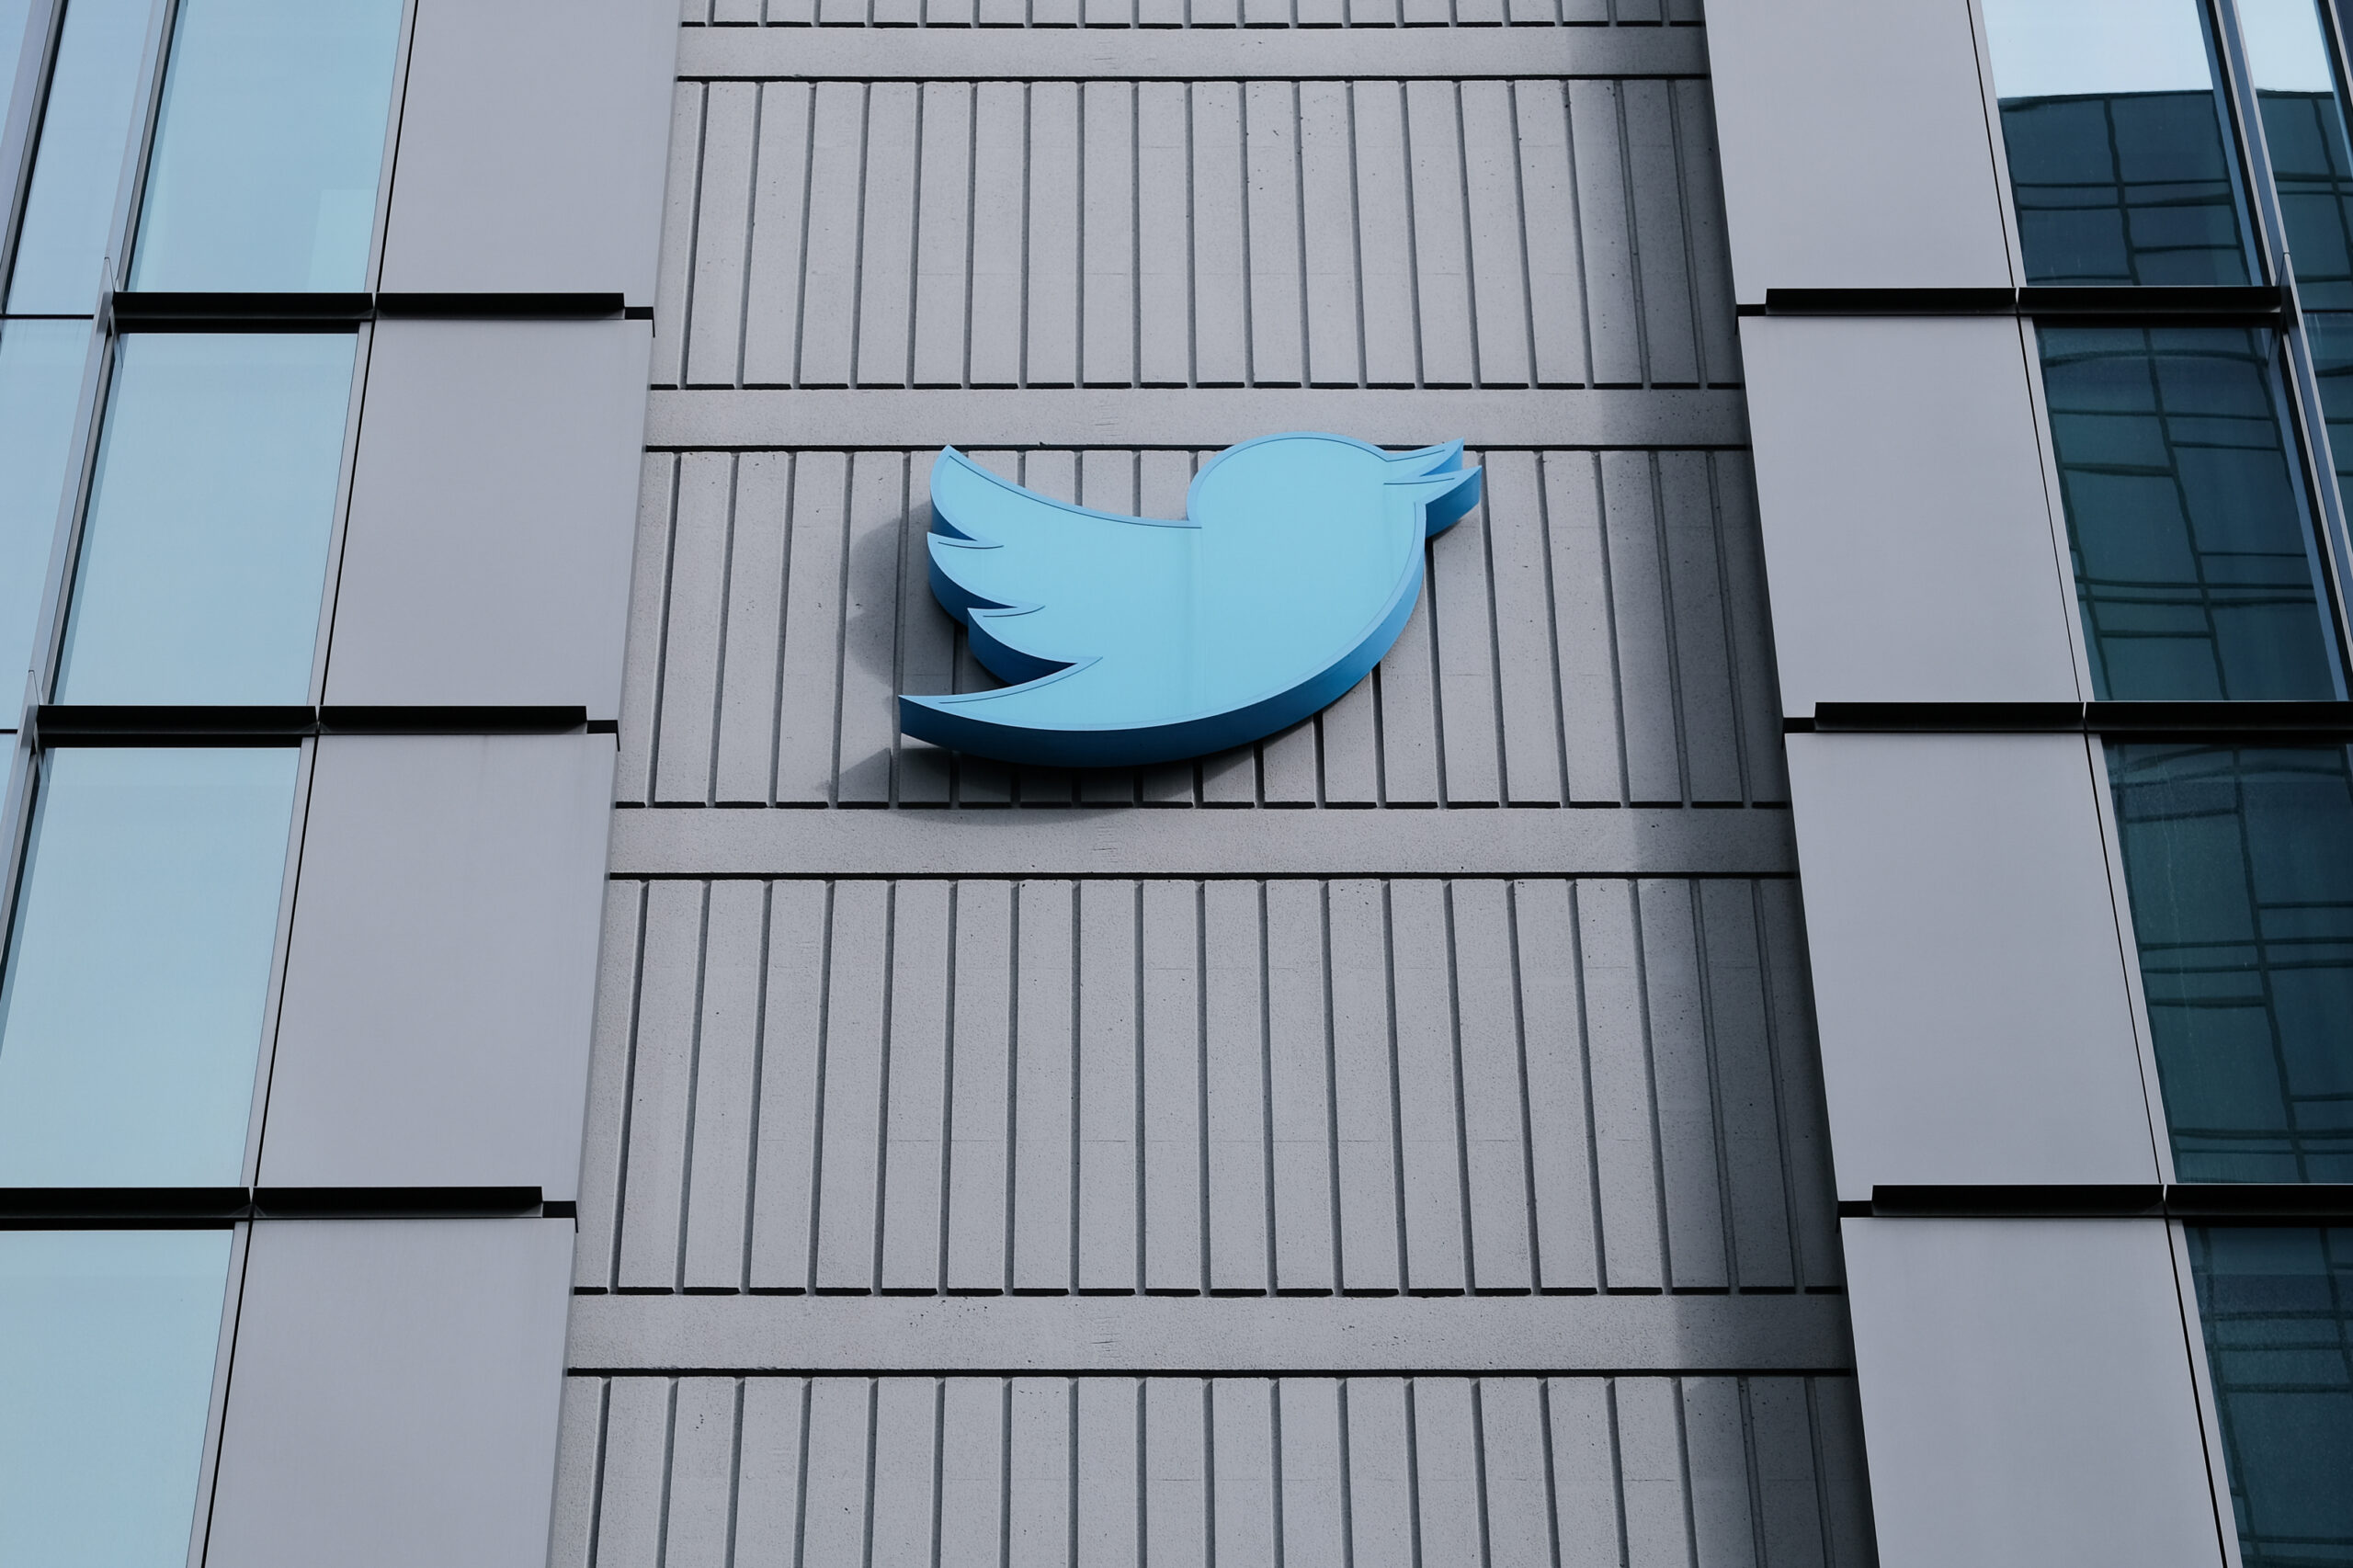 Over 200 million email addresses stolen in Twitter cyber attack